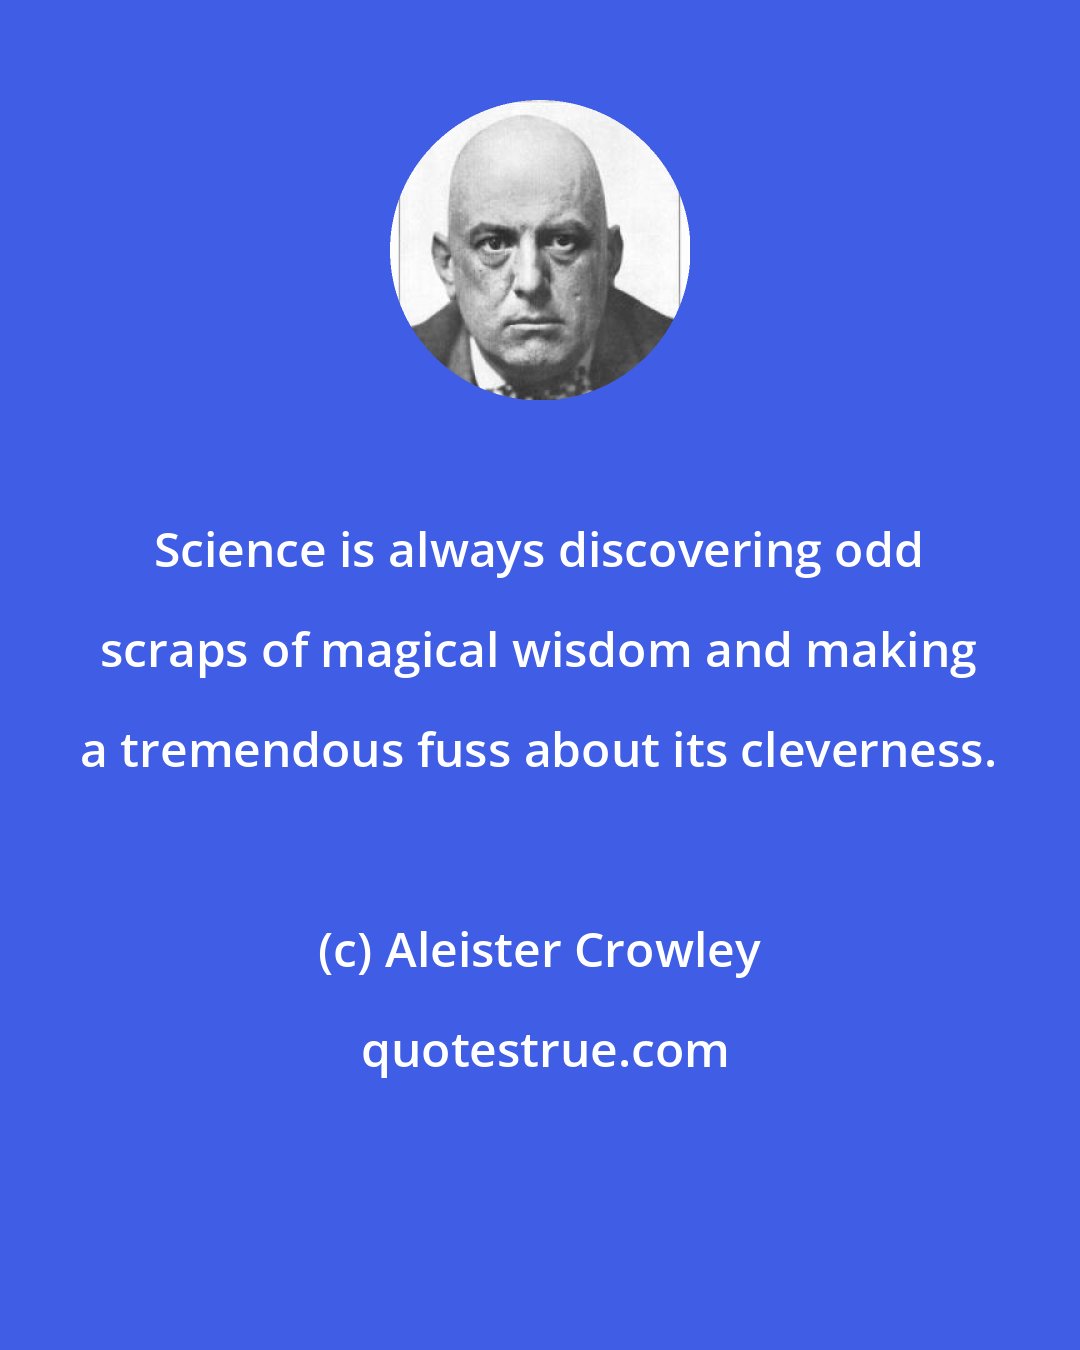 Aleister Crowley: Science is always discovering odd scraps of magical wisdom and making a tremendous fuss about its cleverness.